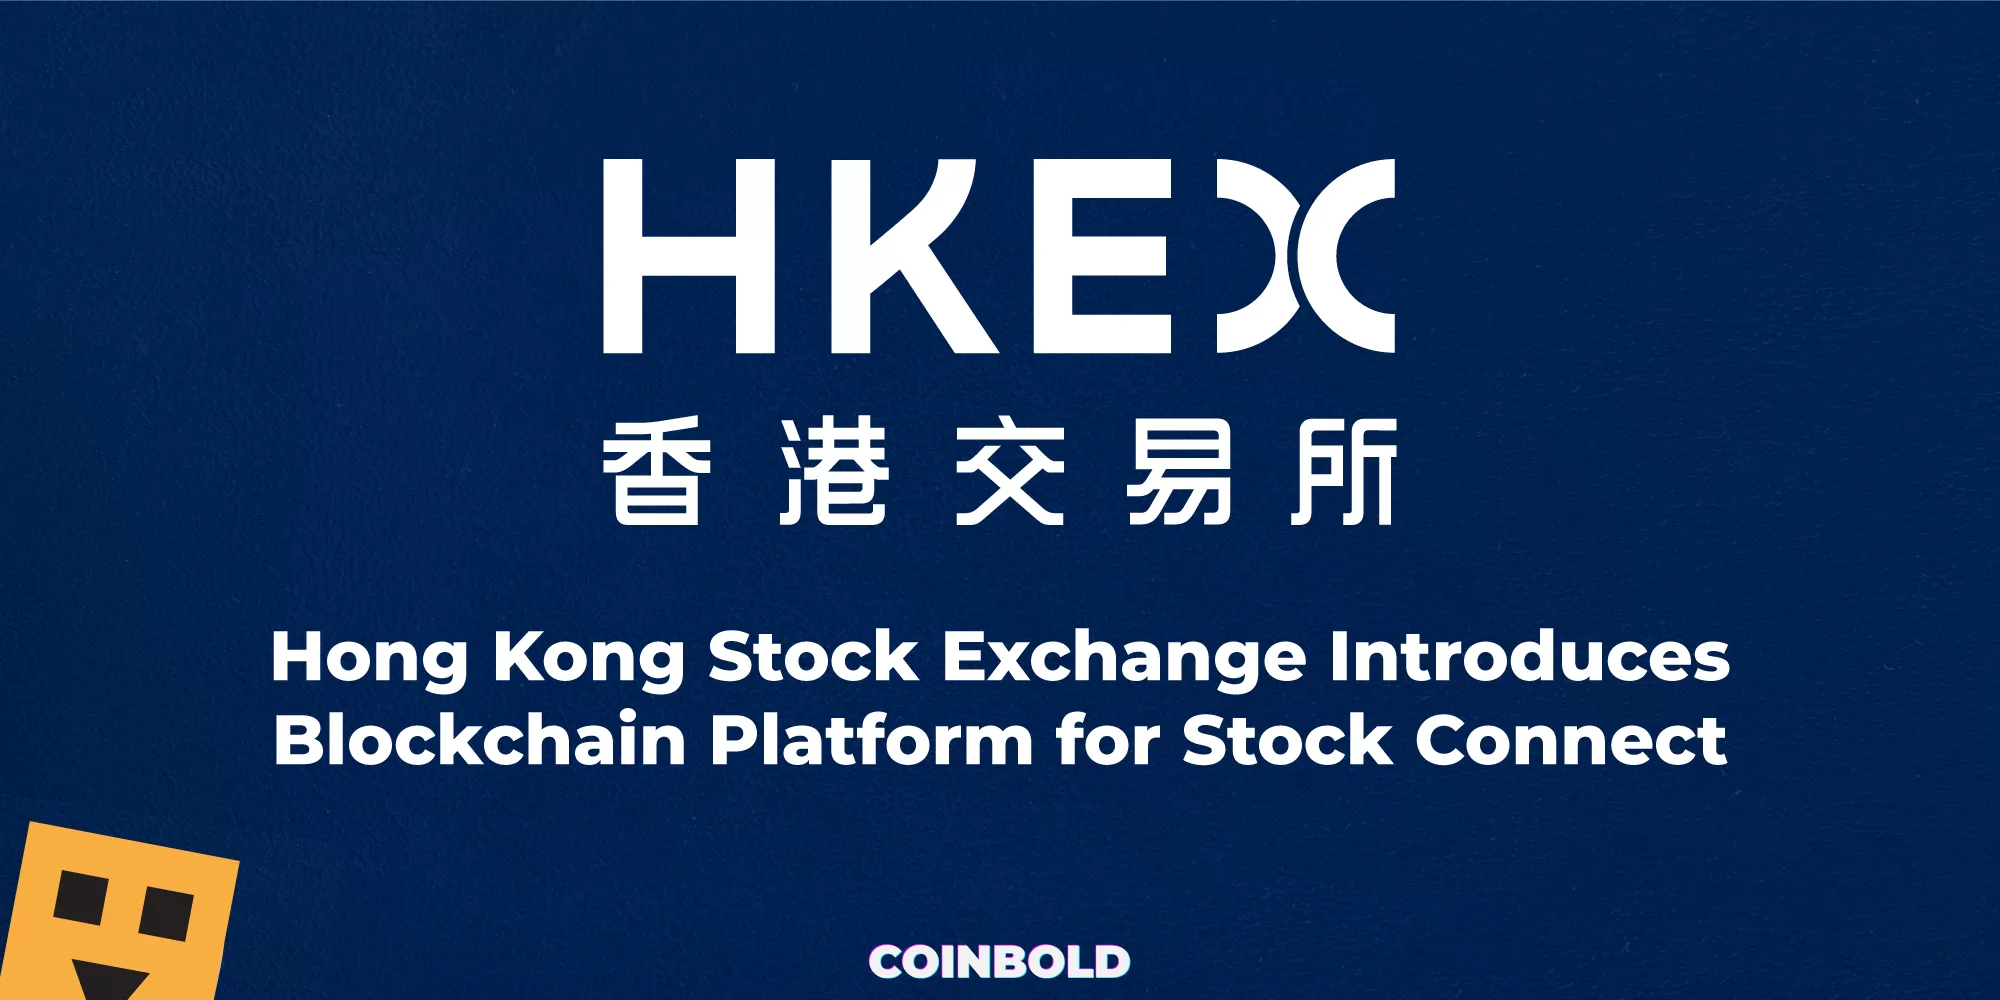 Hong Kong Stock Exchange Introduces Blockchain Platform for Stock Connect